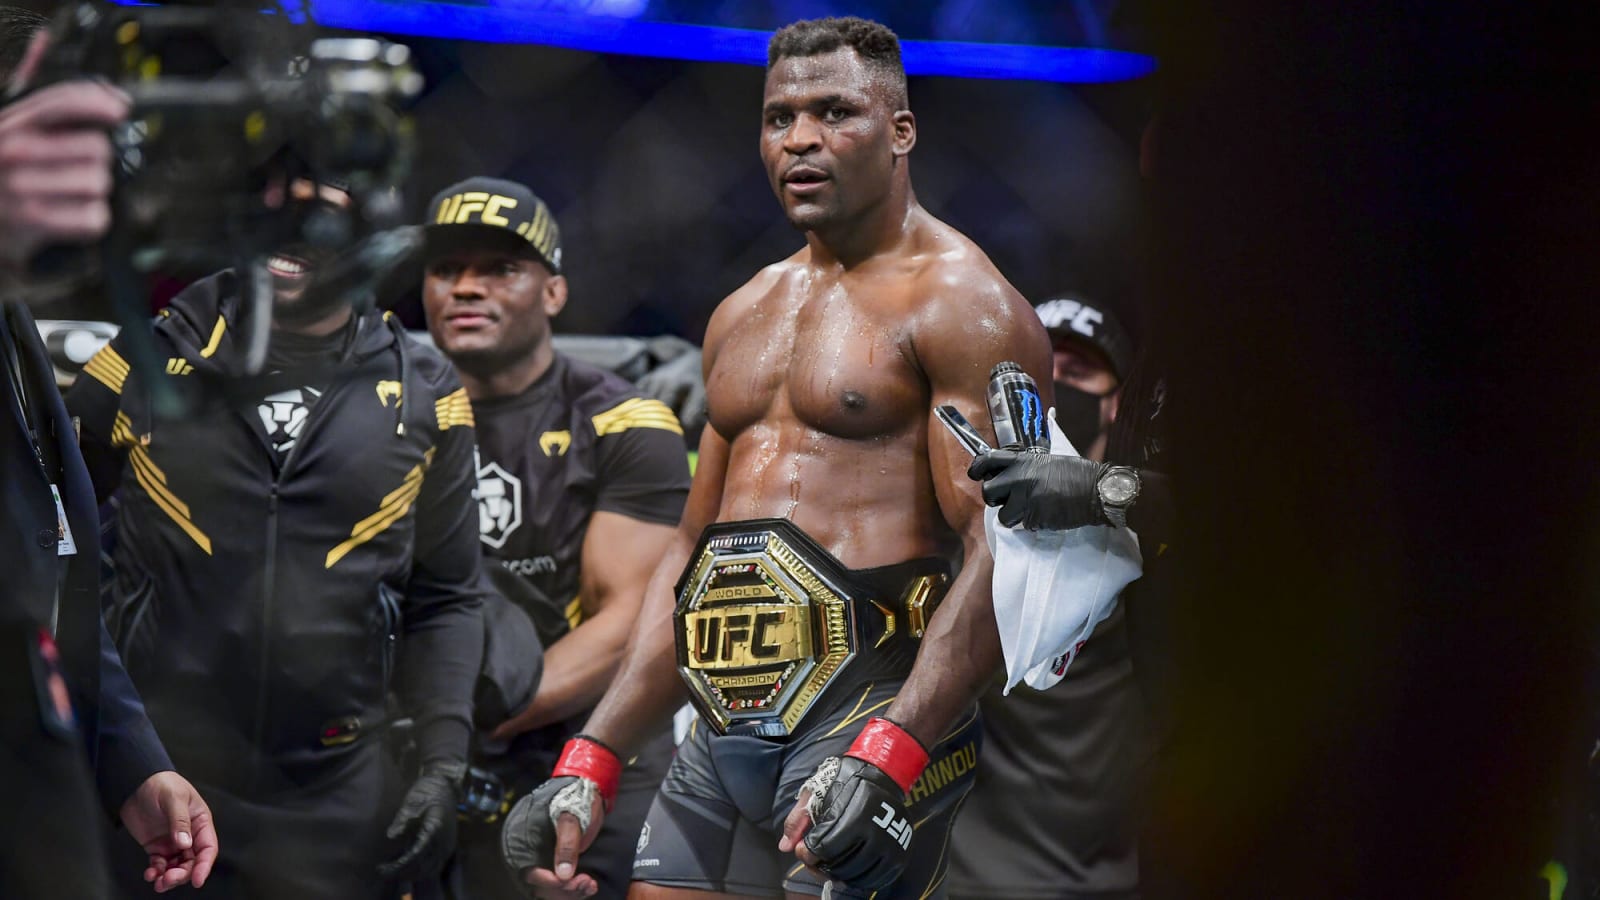 Francis Ngannou’s devastating loss to Anthony Joshua will see quick turnaround to MMA, claims PFL founder